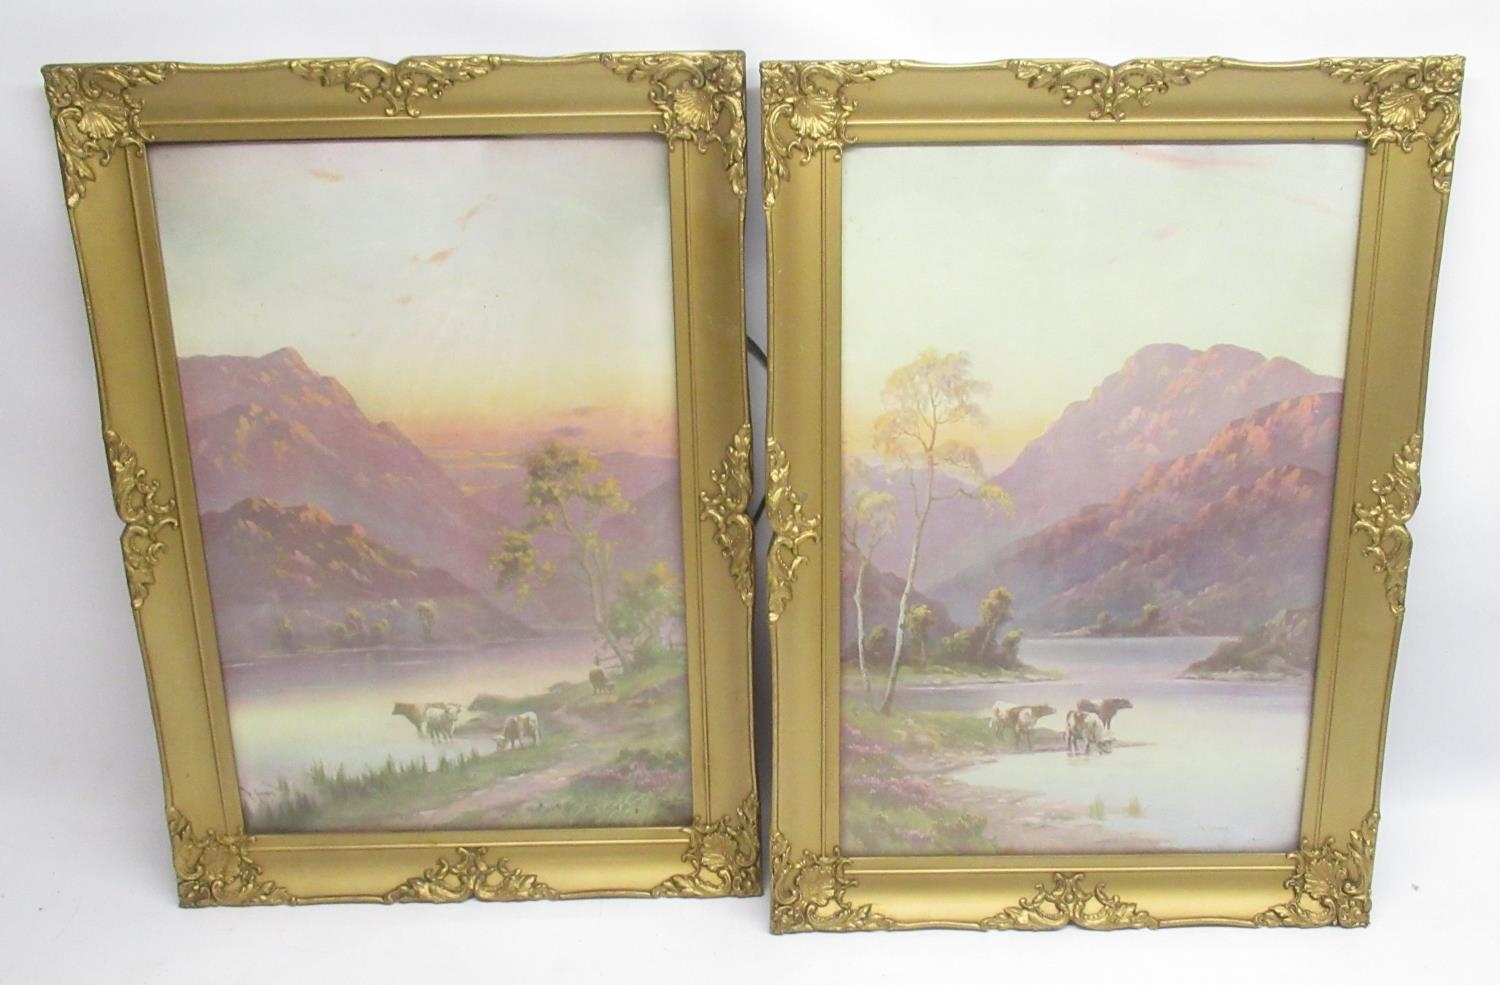 R.Cooper, C20th pair of coloured prints showing highland landscape scene with cattle by stream,